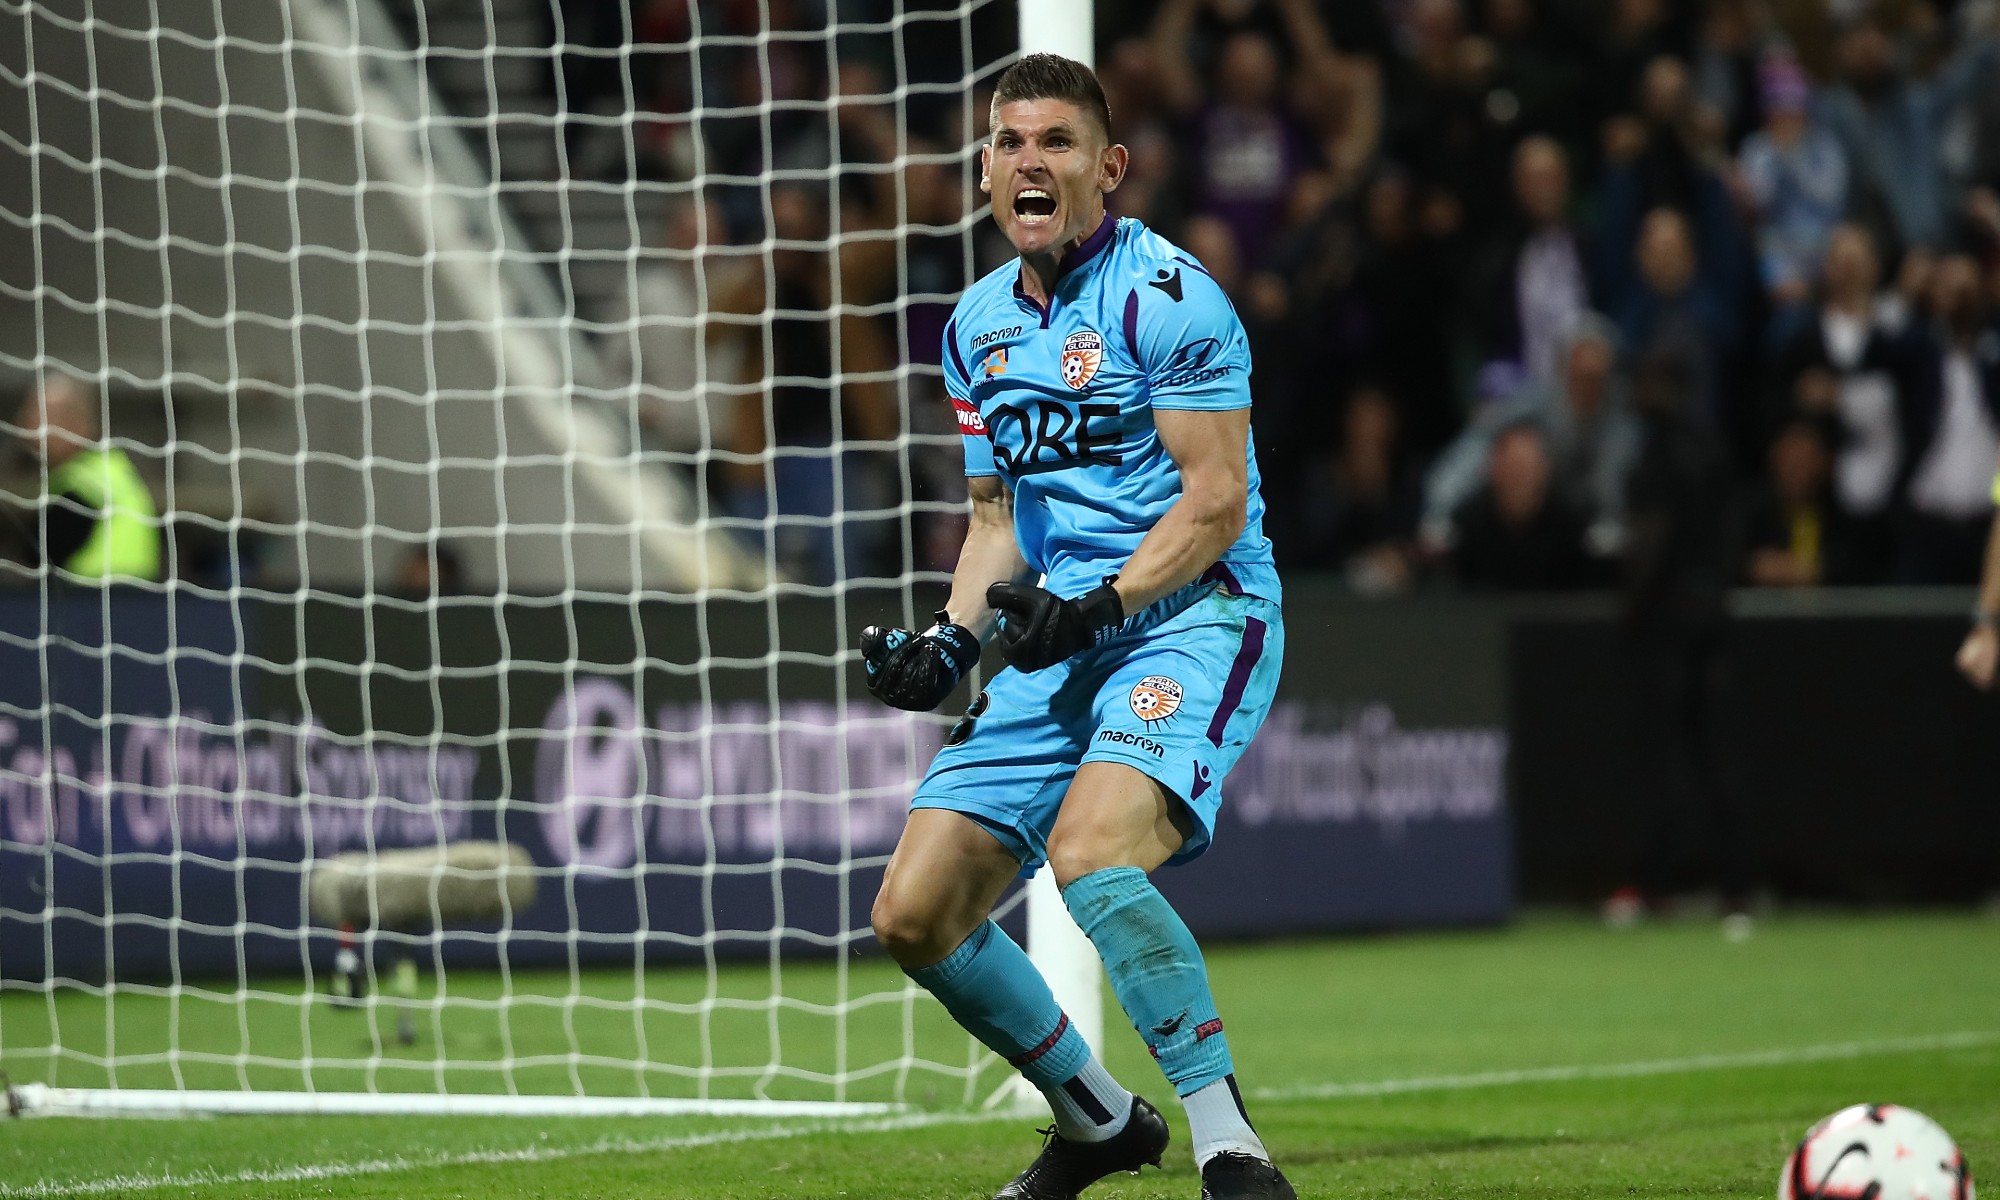 Glory keeper Liam Reddy after making the game-winning save in the 2018/19 Semi Final penalty shootout against Adelaide United